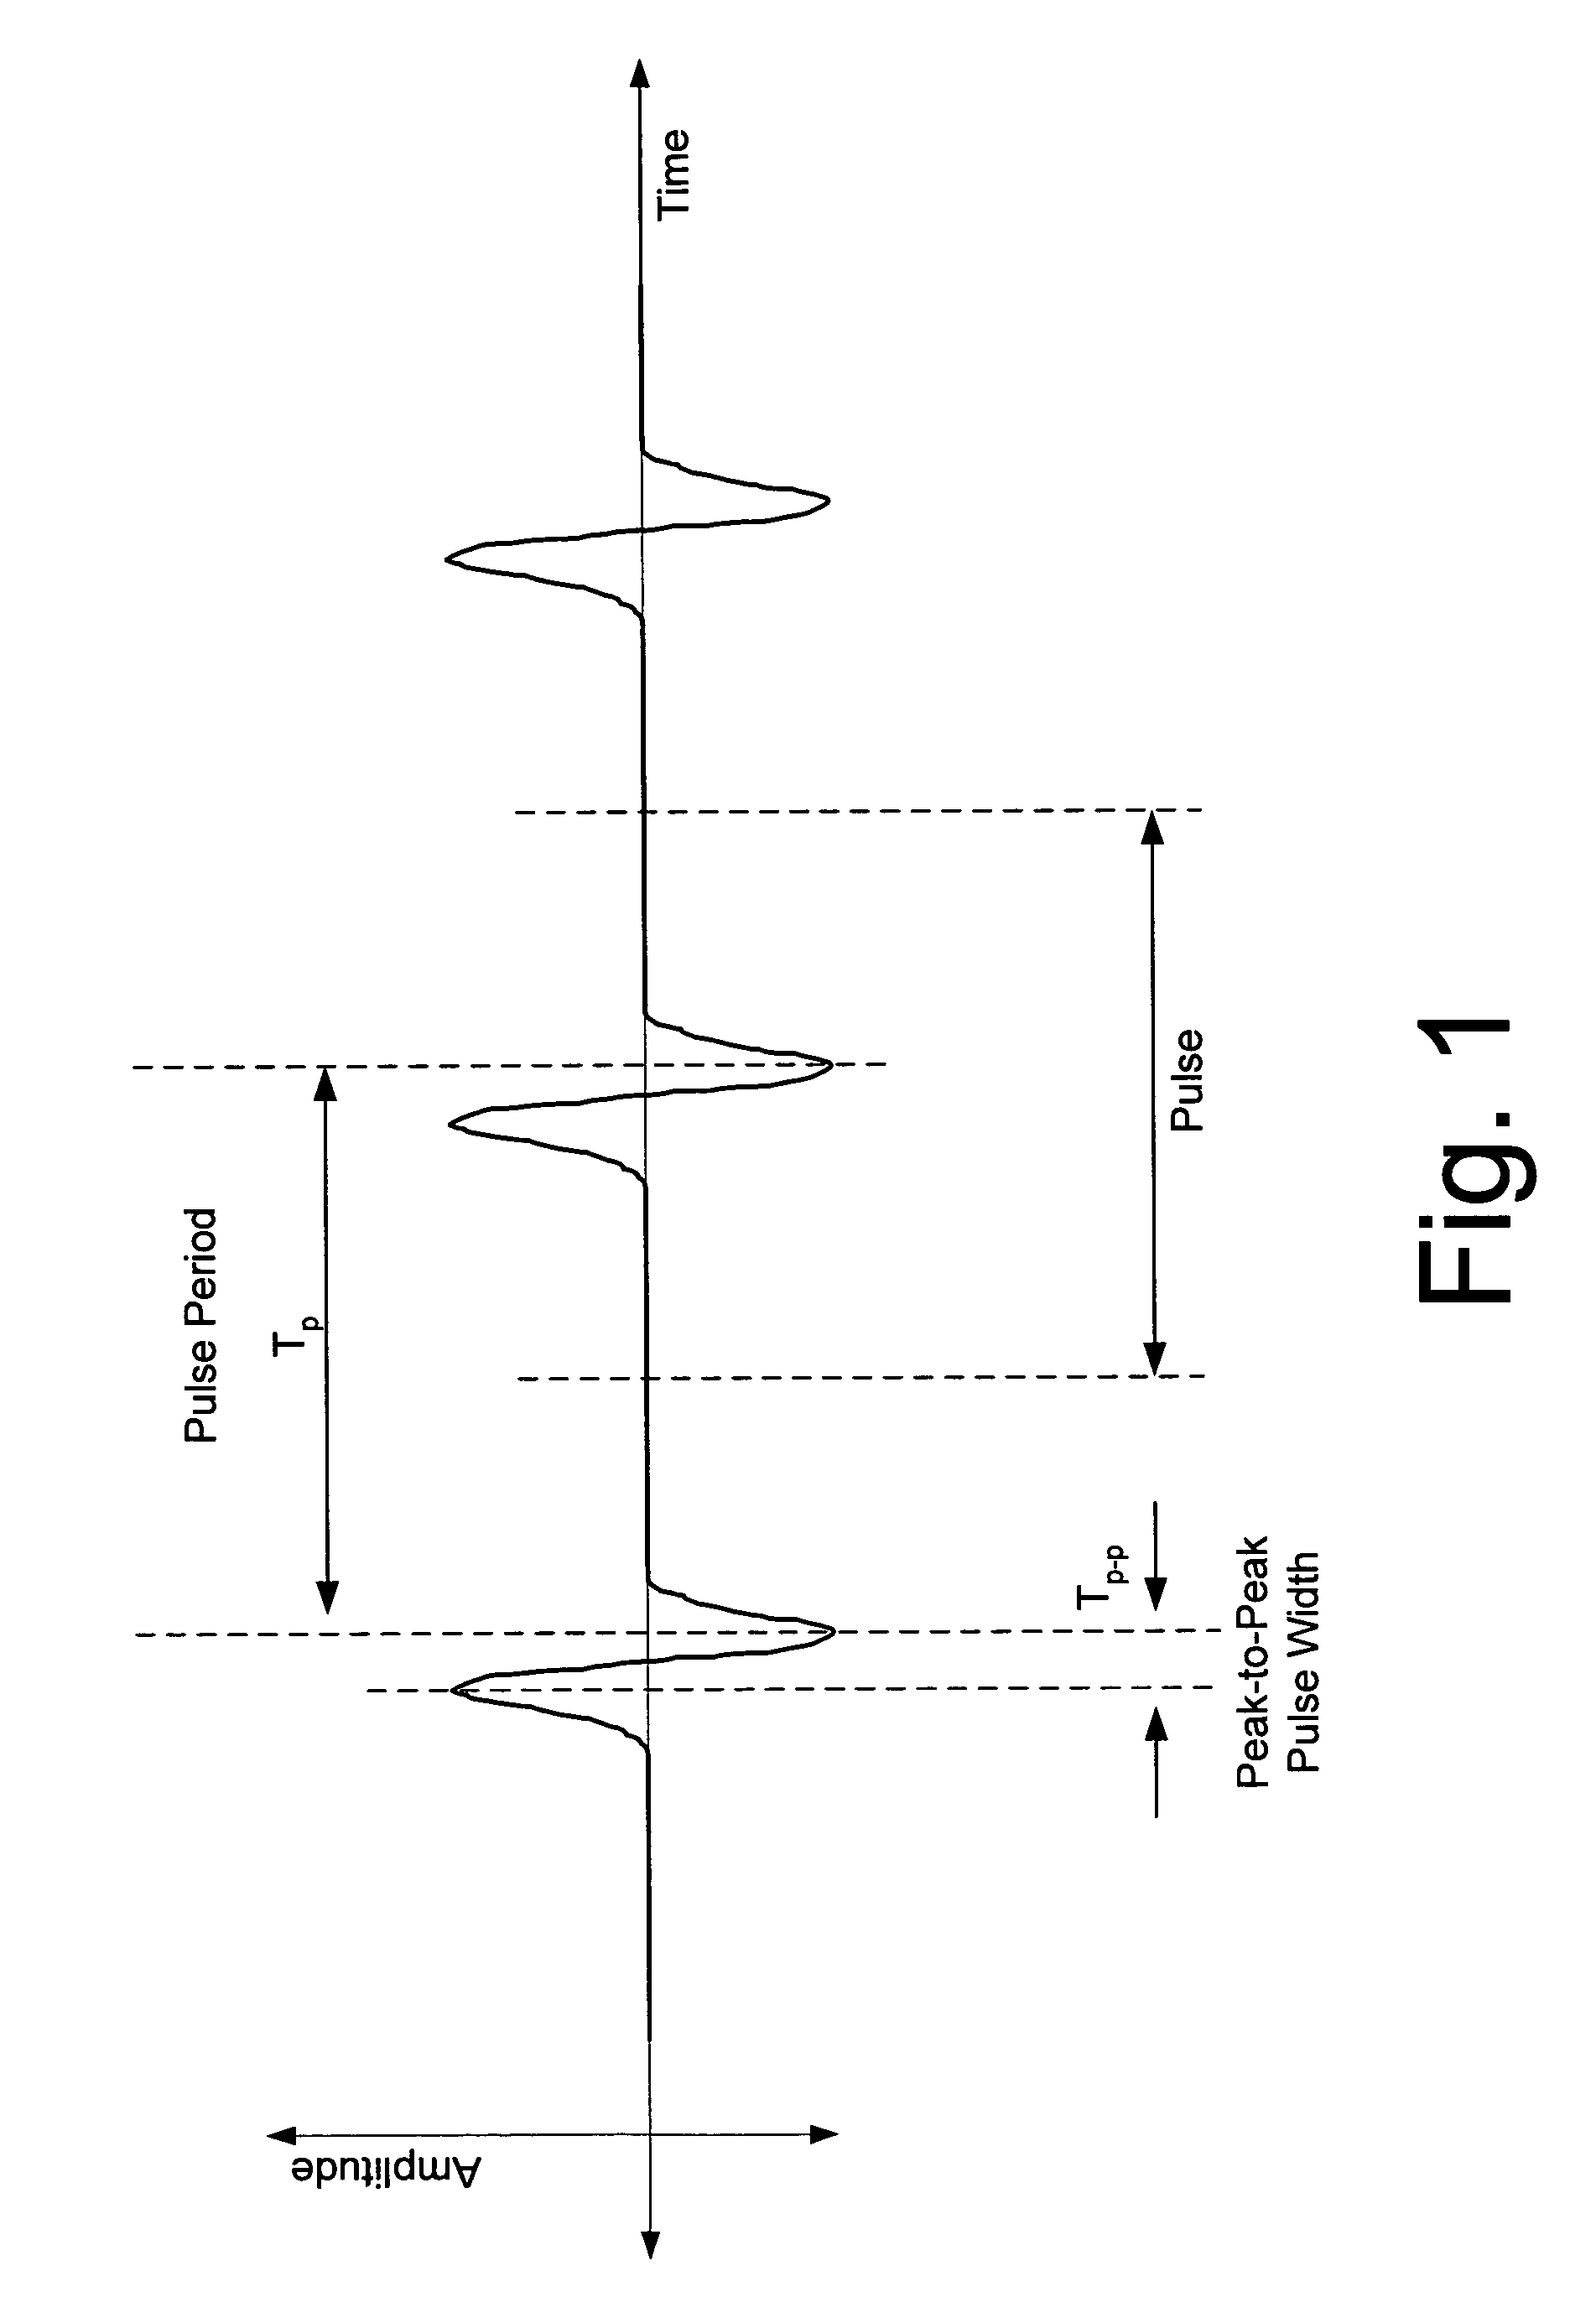 Method for making a clear channel assessment in a wireless network